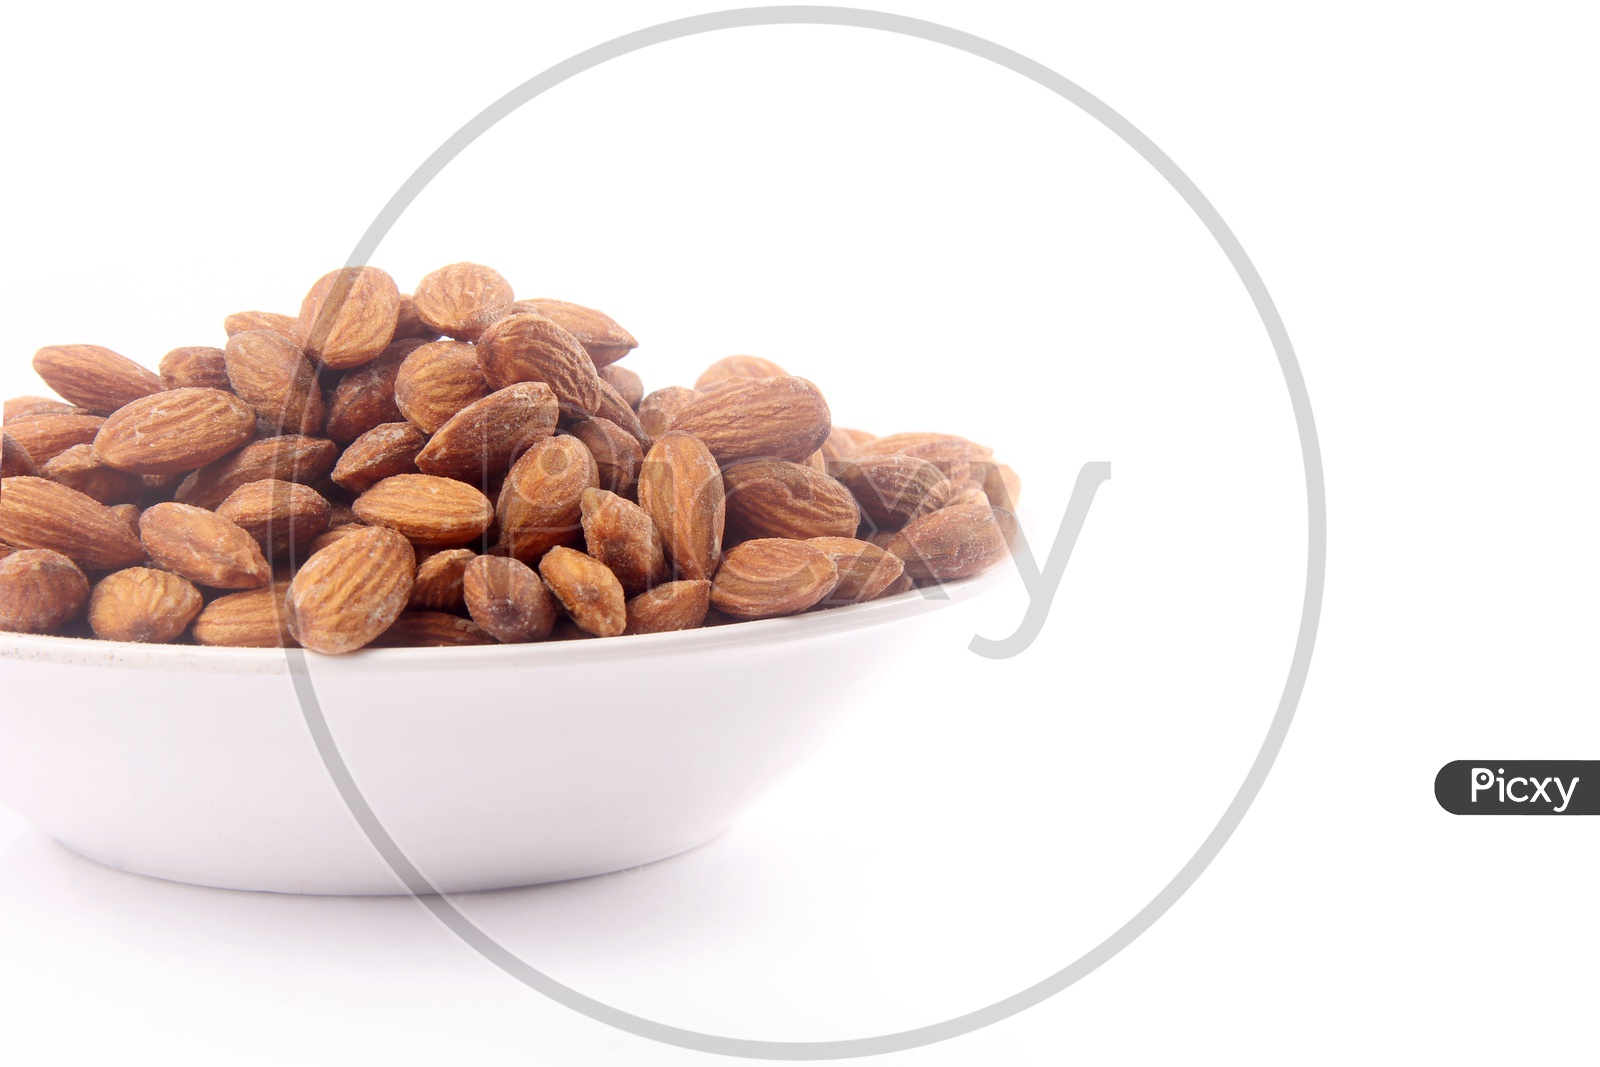 Roasted Almonds Or Badam Nuts In a Bowl On an Isolated White Background